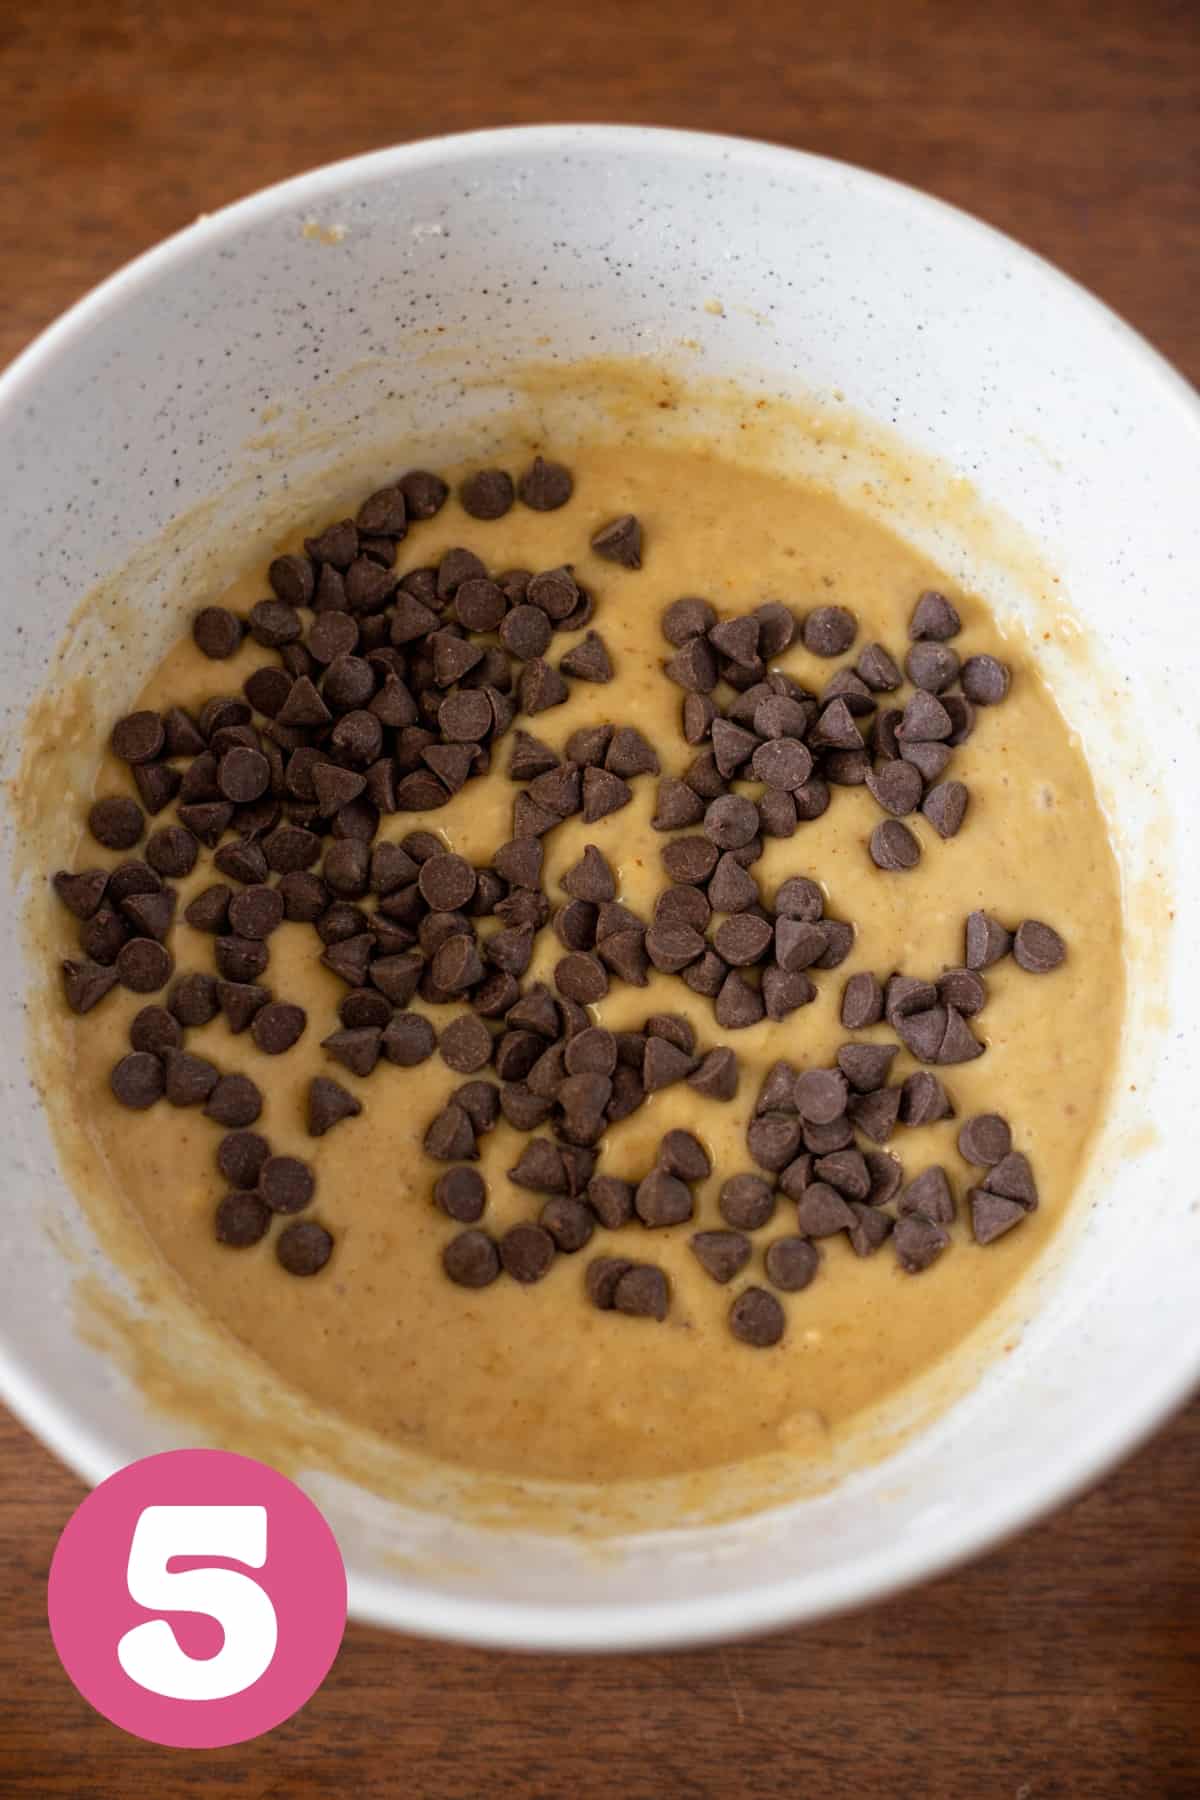 A large bowl of combine banana bread batter with chocolate chips sprinkled in